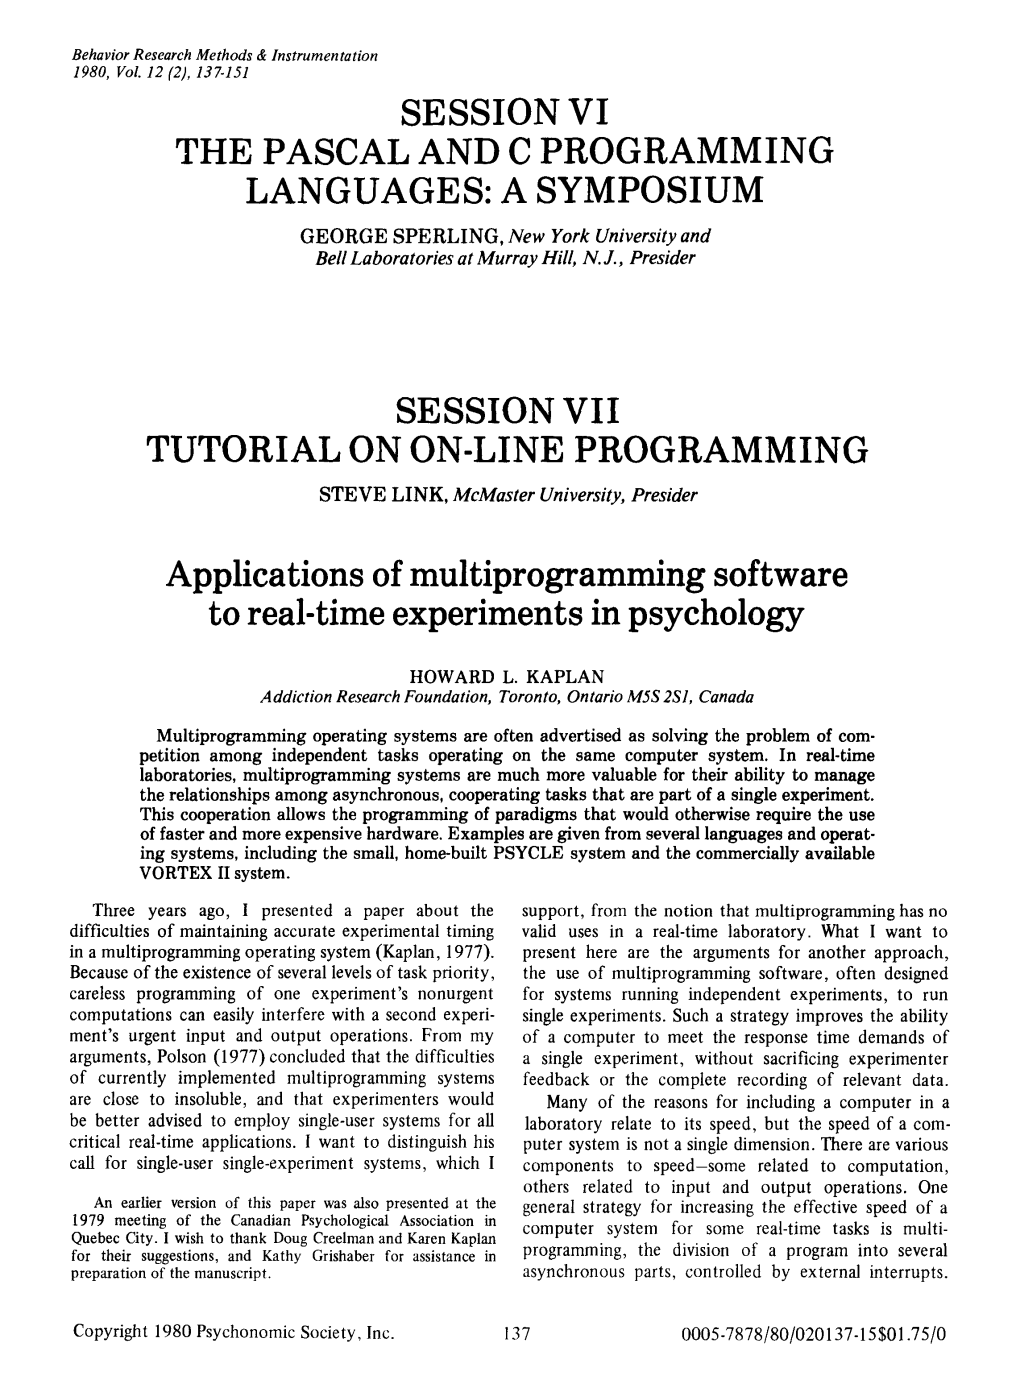 Applications of Multiprogramming Software to Real-Time Experiments in Psychology